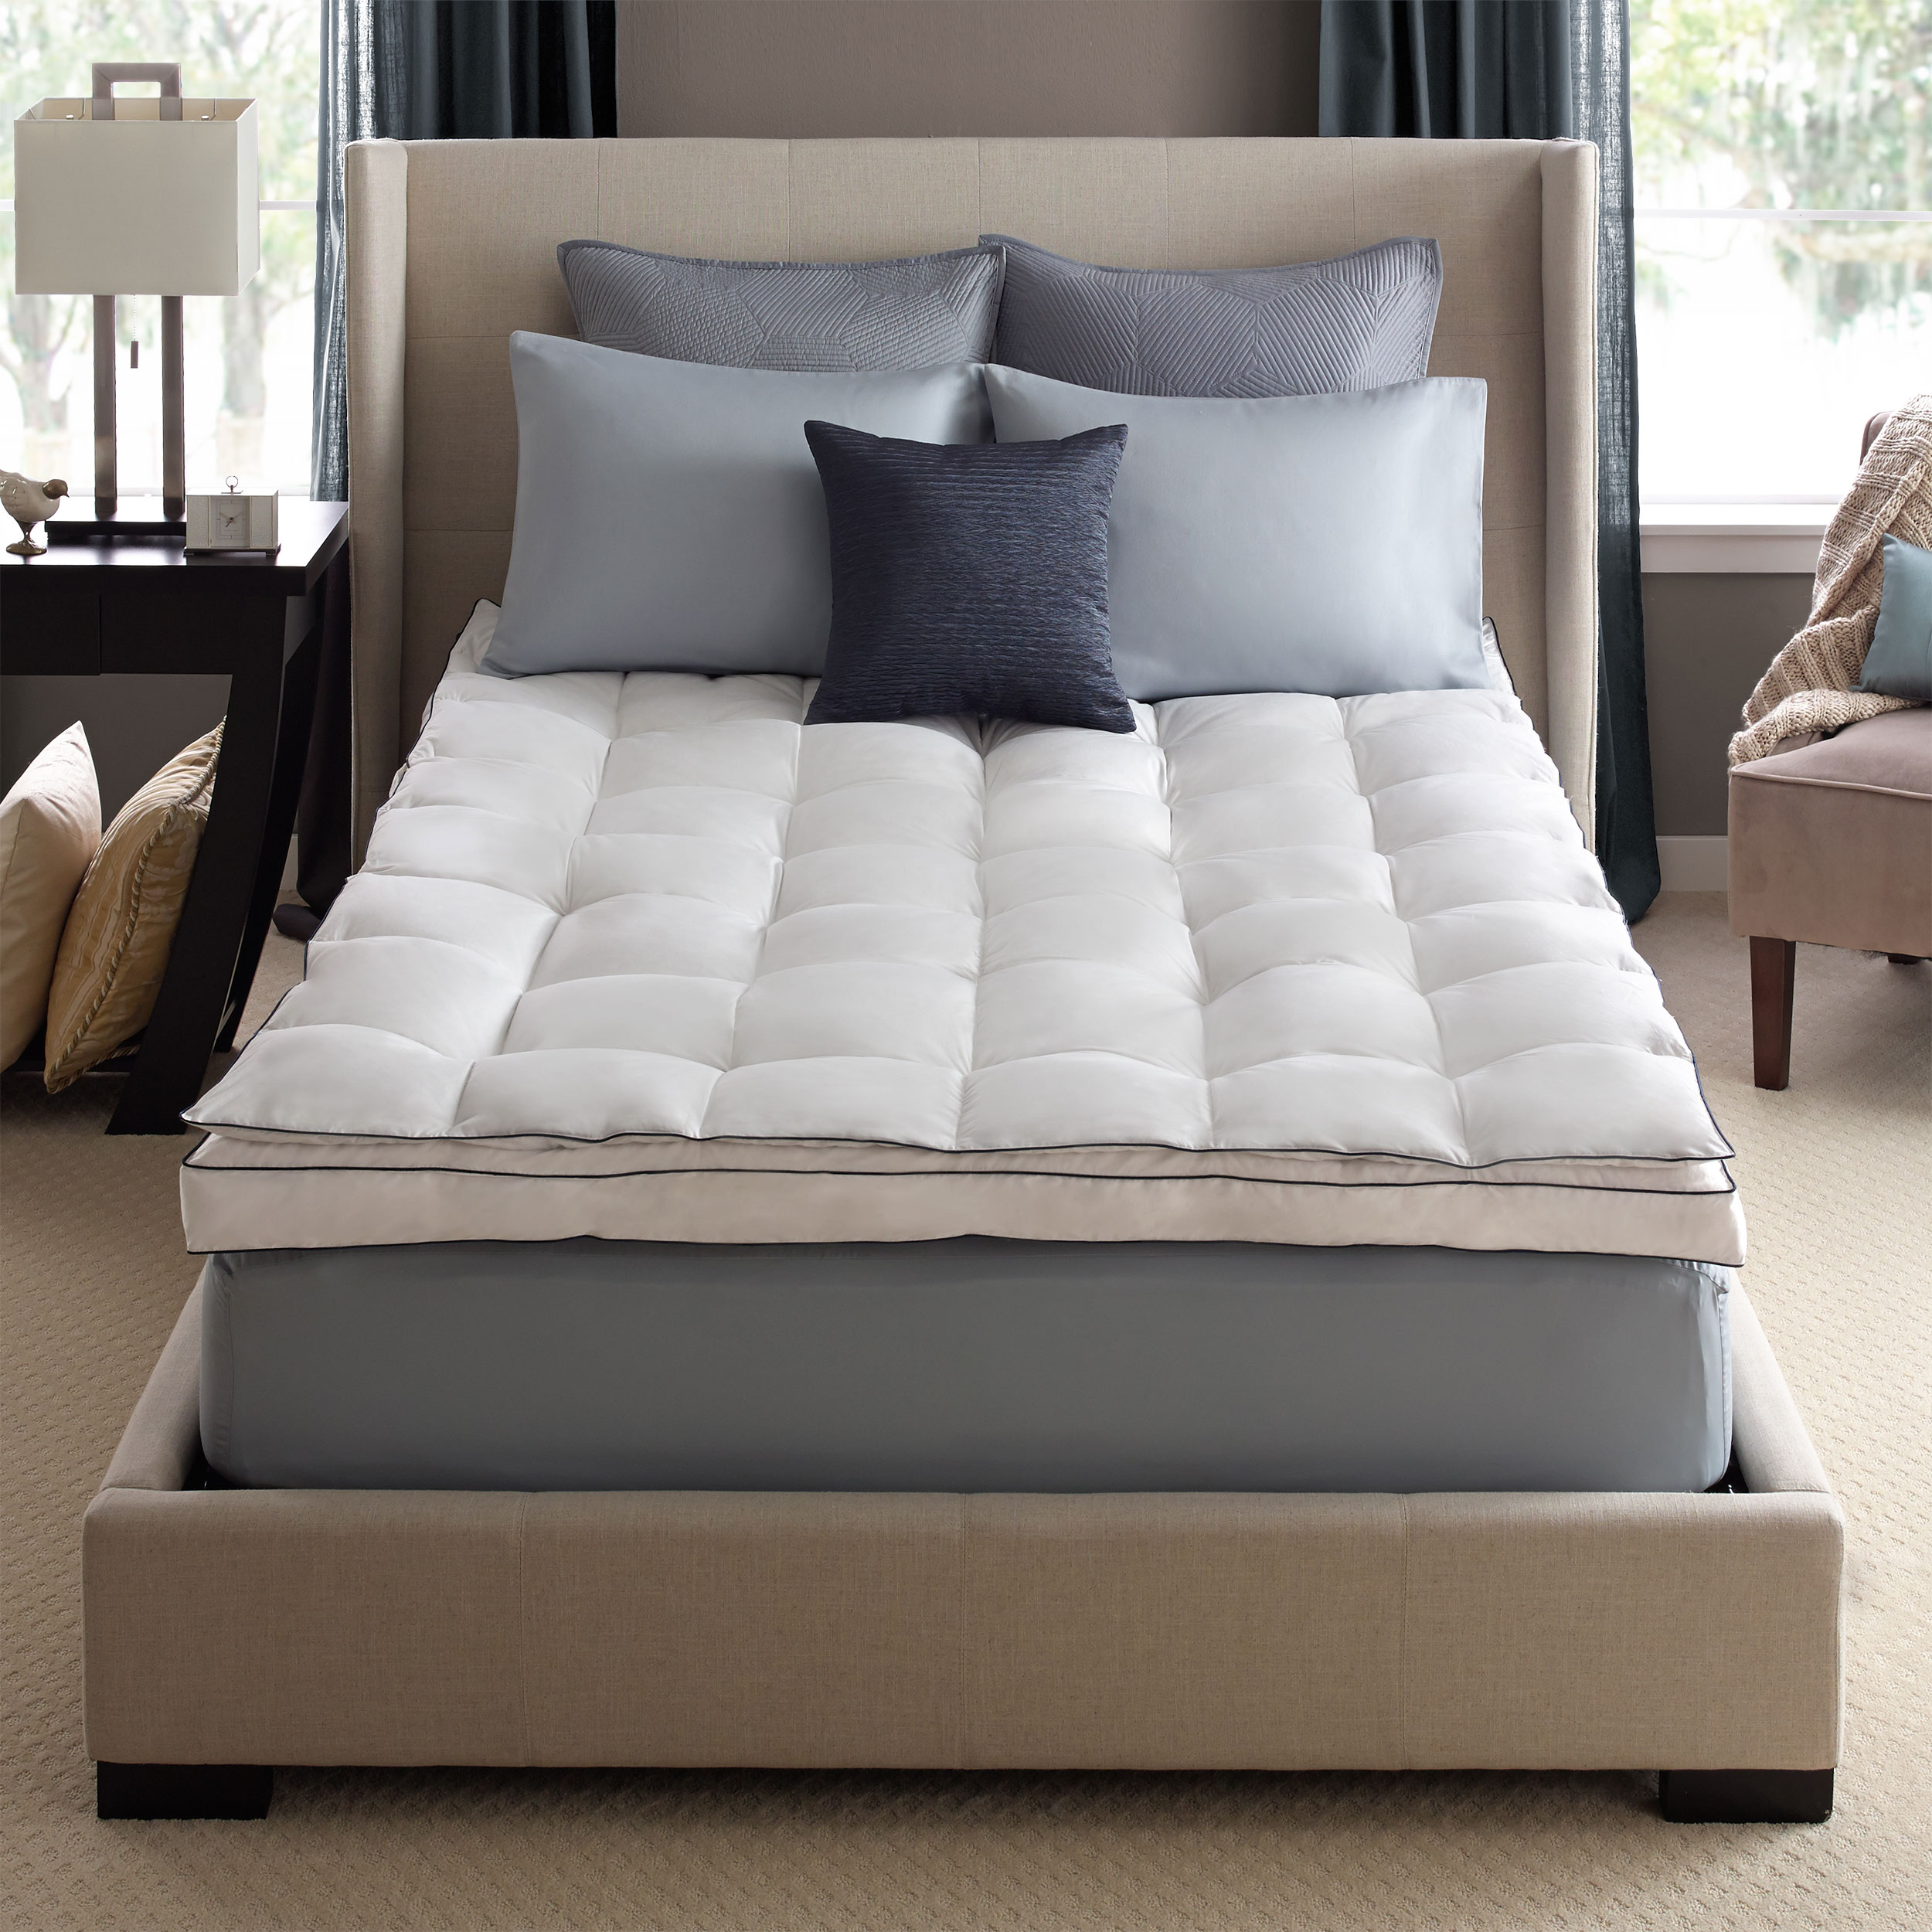 Pacific Coast® Online Bedding Stores Featherbeds